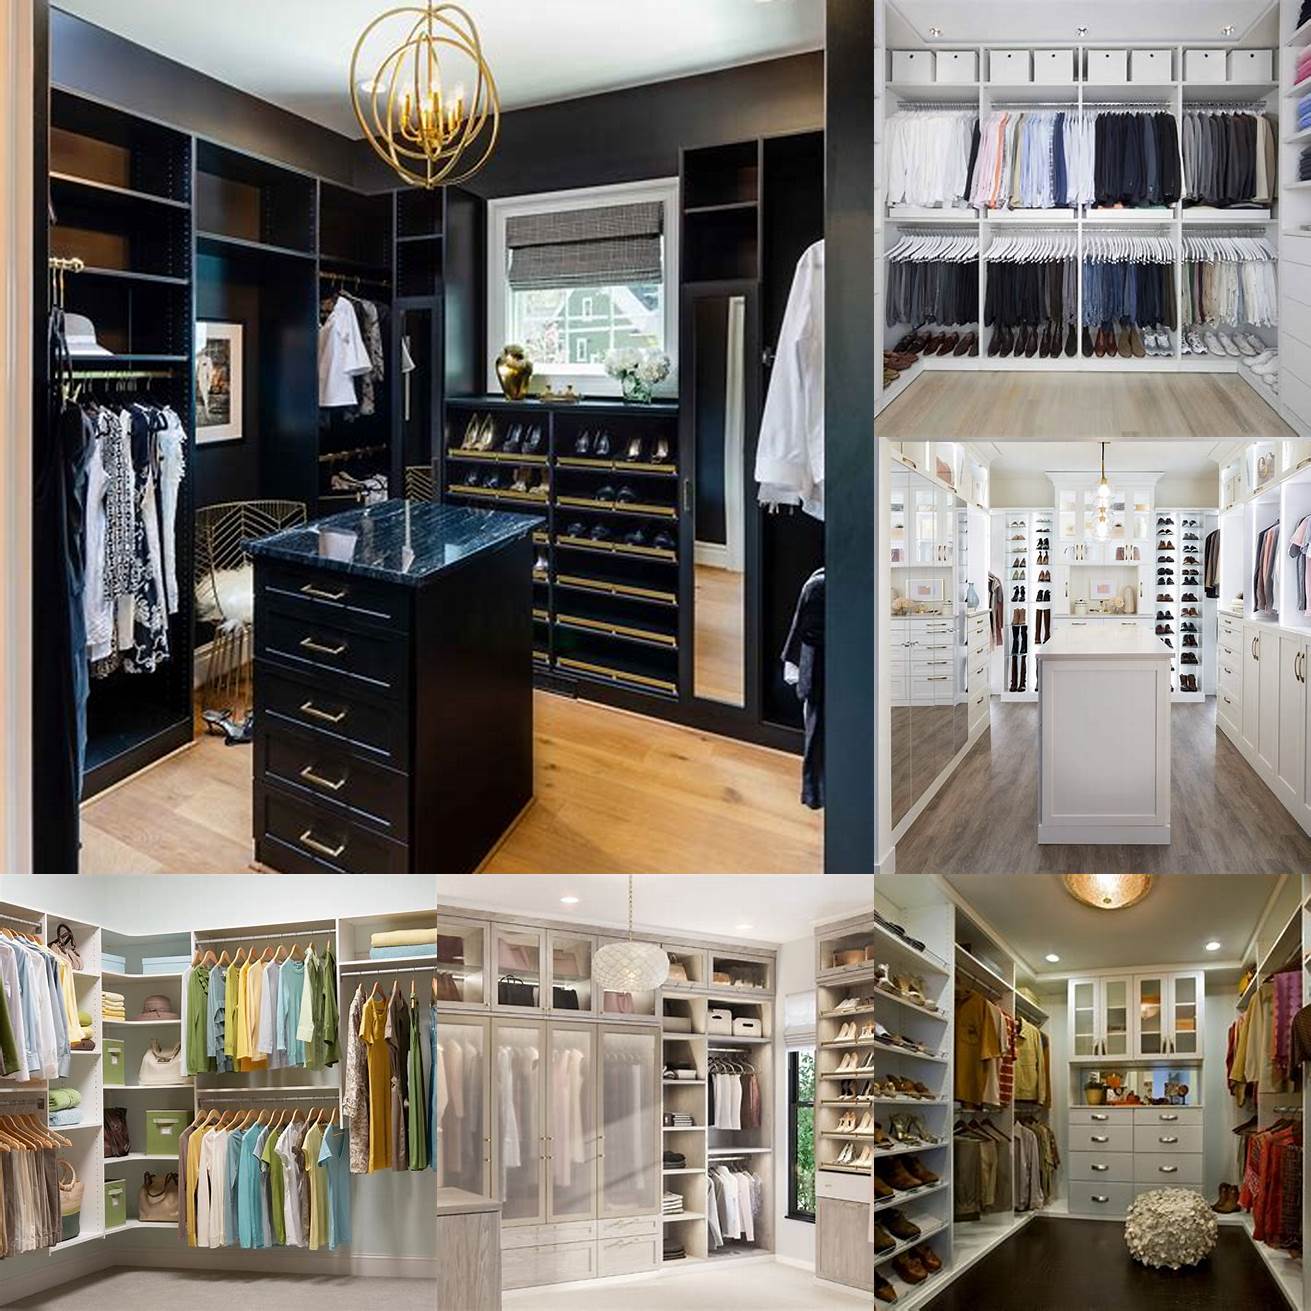 3 Style Choose a style that complements your space and personal taste Closet furniture comes in different styles and designs to suit different needs and preferences